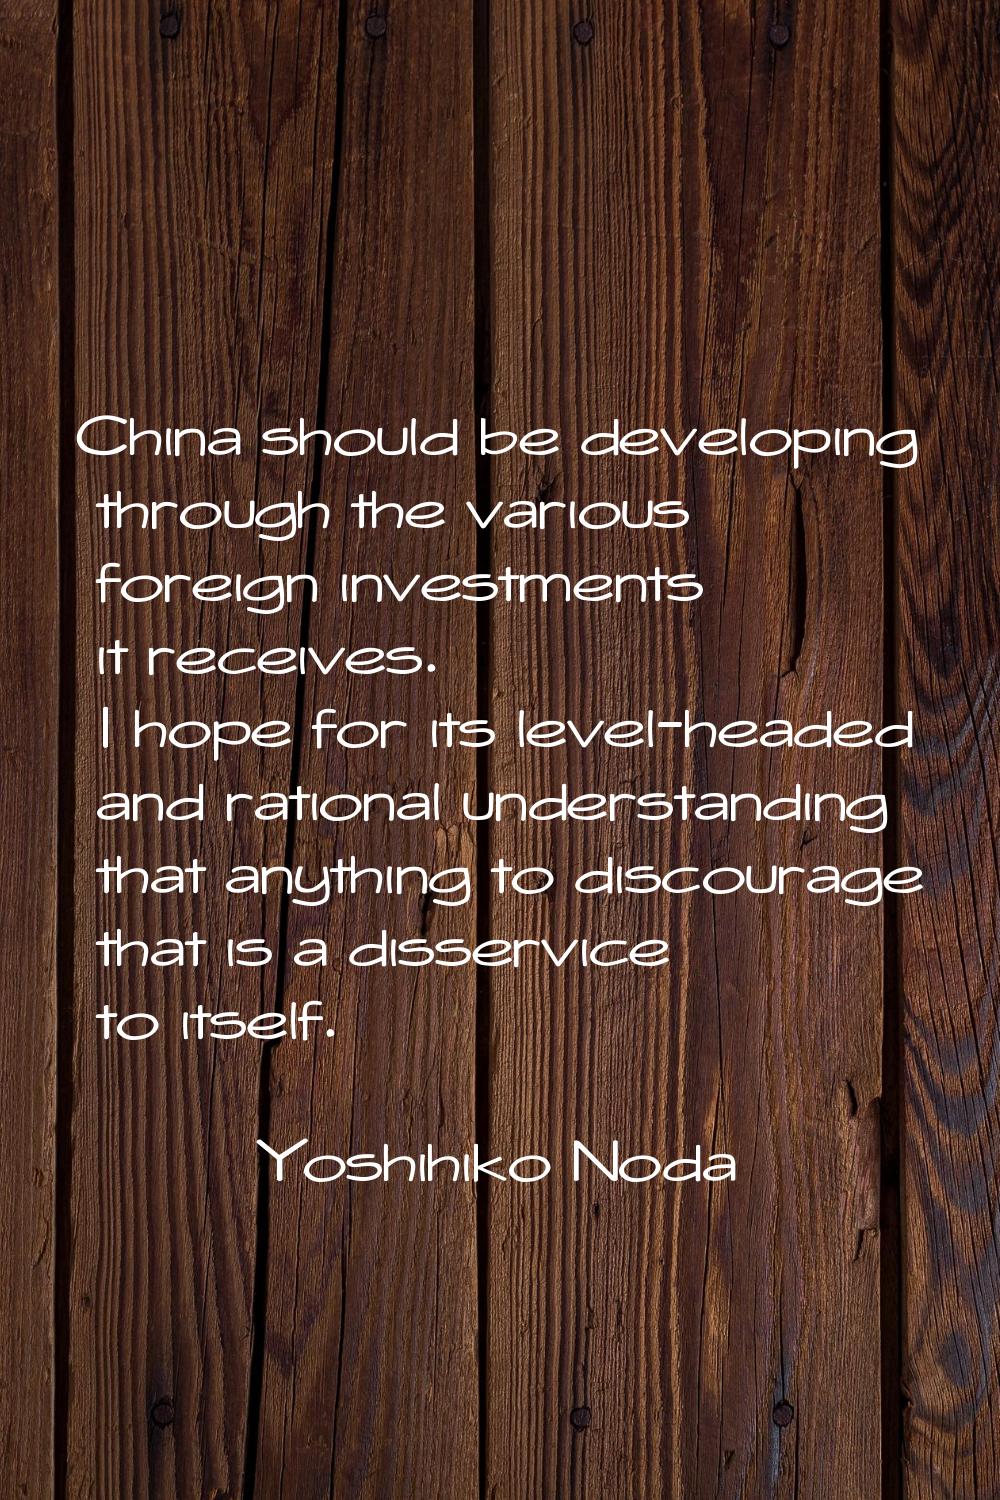 China should be developing through the various foreign investments it receives. I hope for its leve